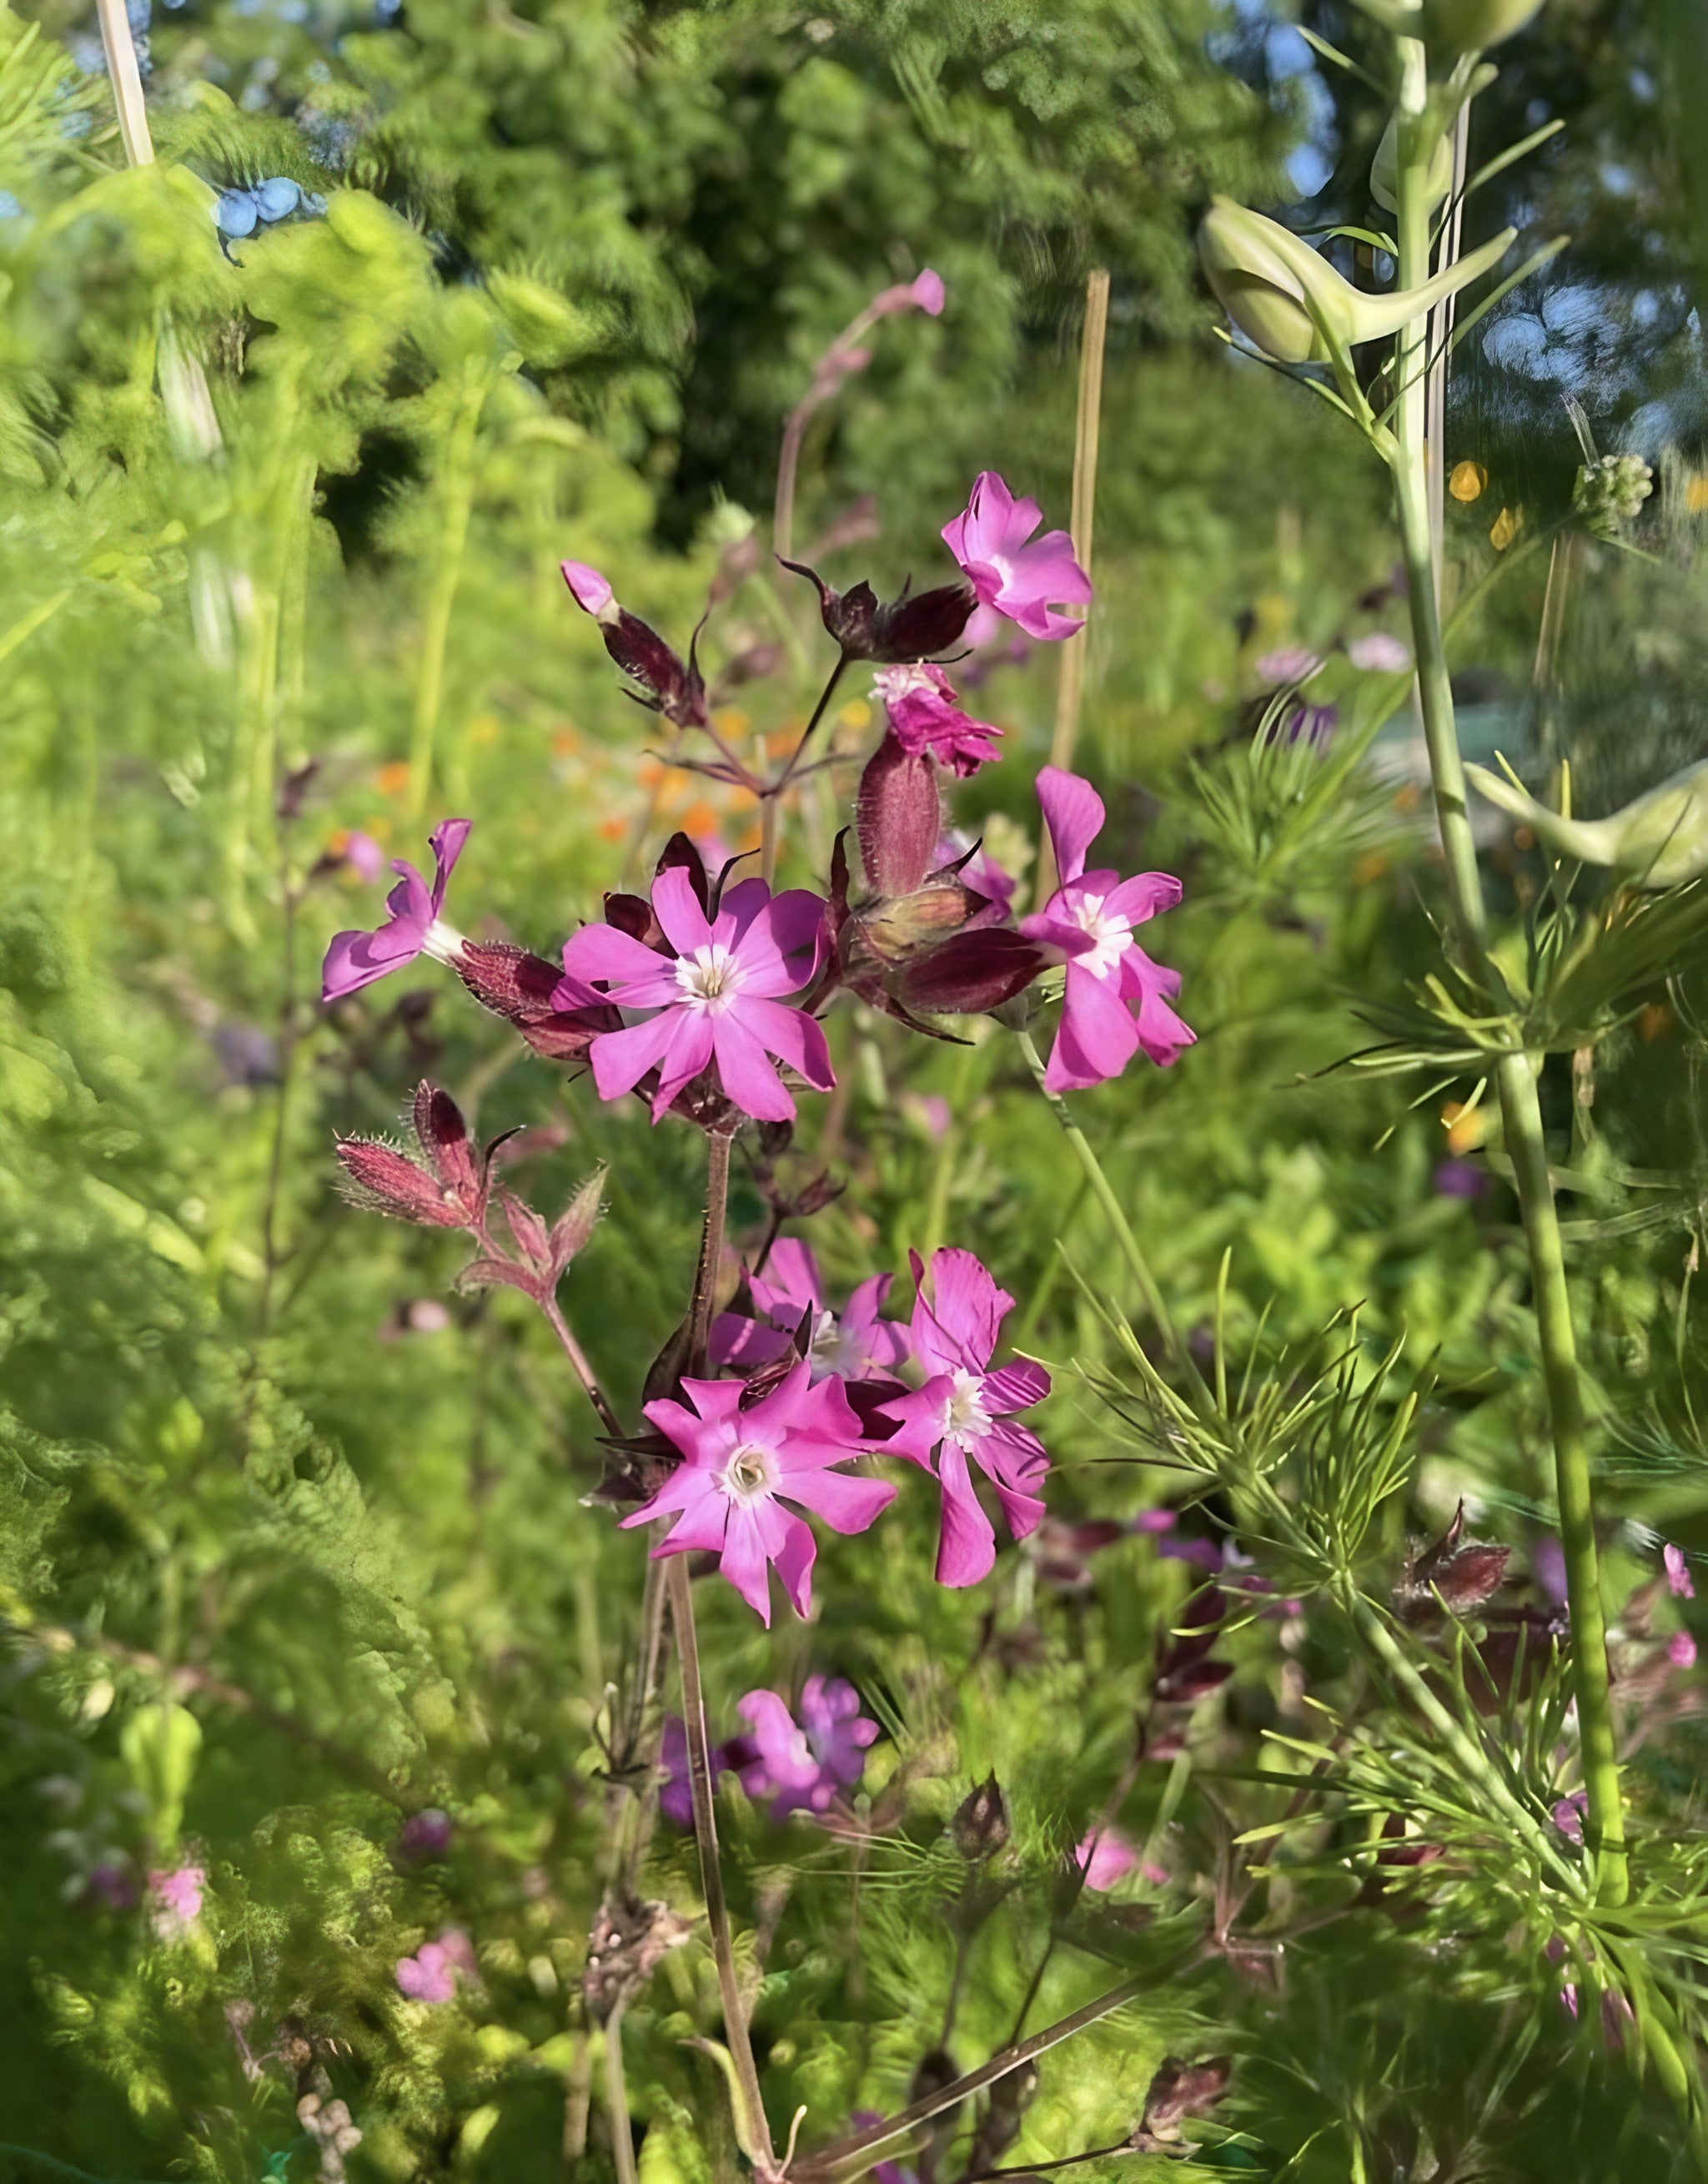 Cluster of Red Campion flowers with purple tones among garden greenery